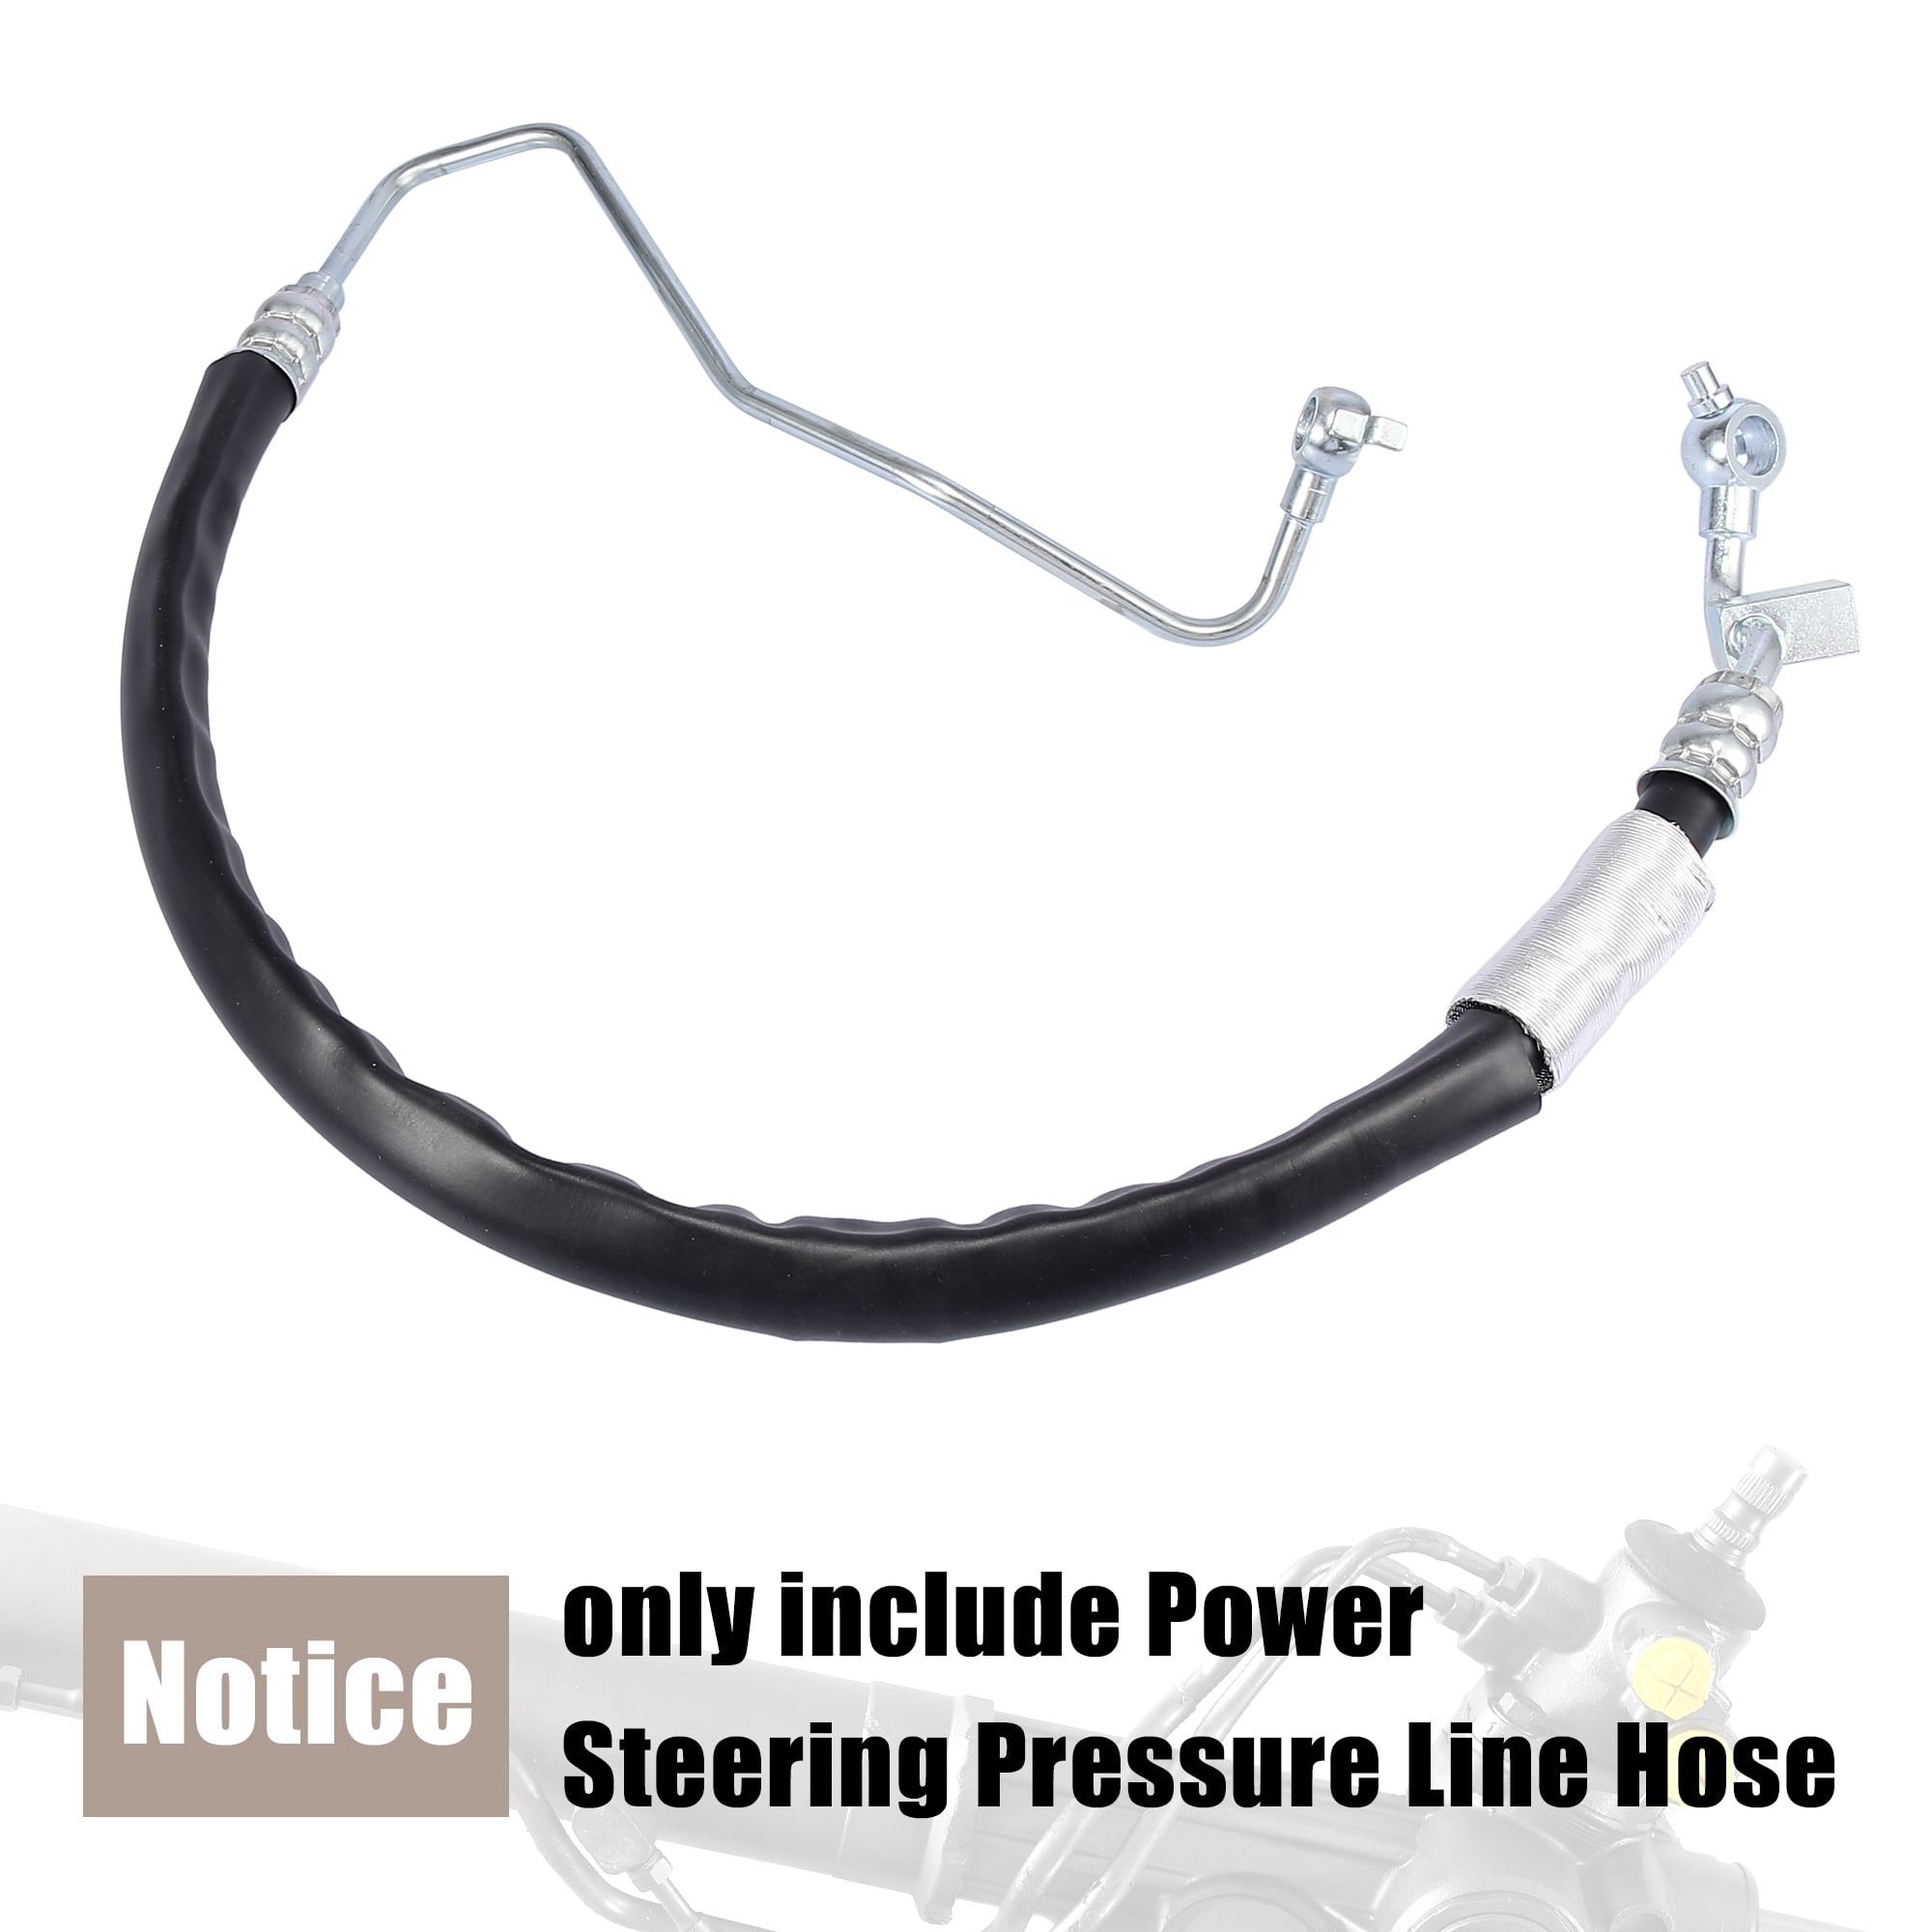 labwork Power Steering Pressure Line Hose Assembly 45464JN Fit for 2009-2014 Nissan Murano 3.5L V6 Gas 